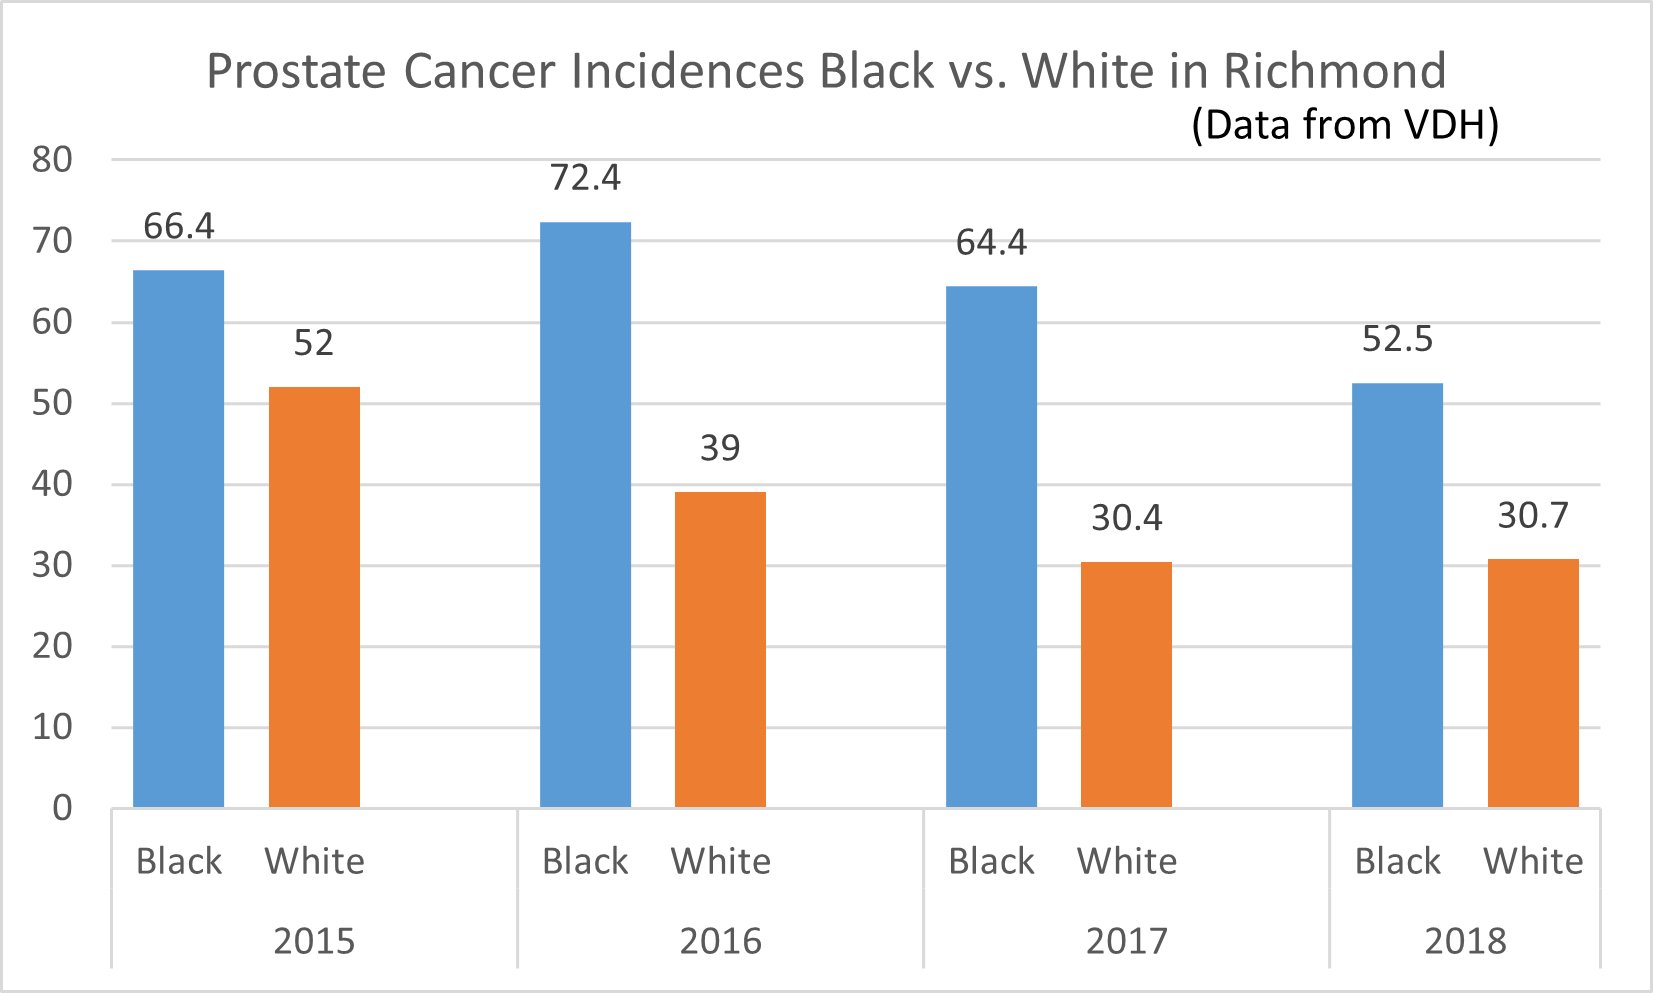 Bar graph showing that from 2015-2018 Blacks had higher incidences of prostate cancer than Whites in Richmond (66.4 vs. 52 in 2015; 72.4 vs. 39 in 2016; 64.4 vs. 30.4 in 2017; 52.5 vs. 30.7 in 2018)